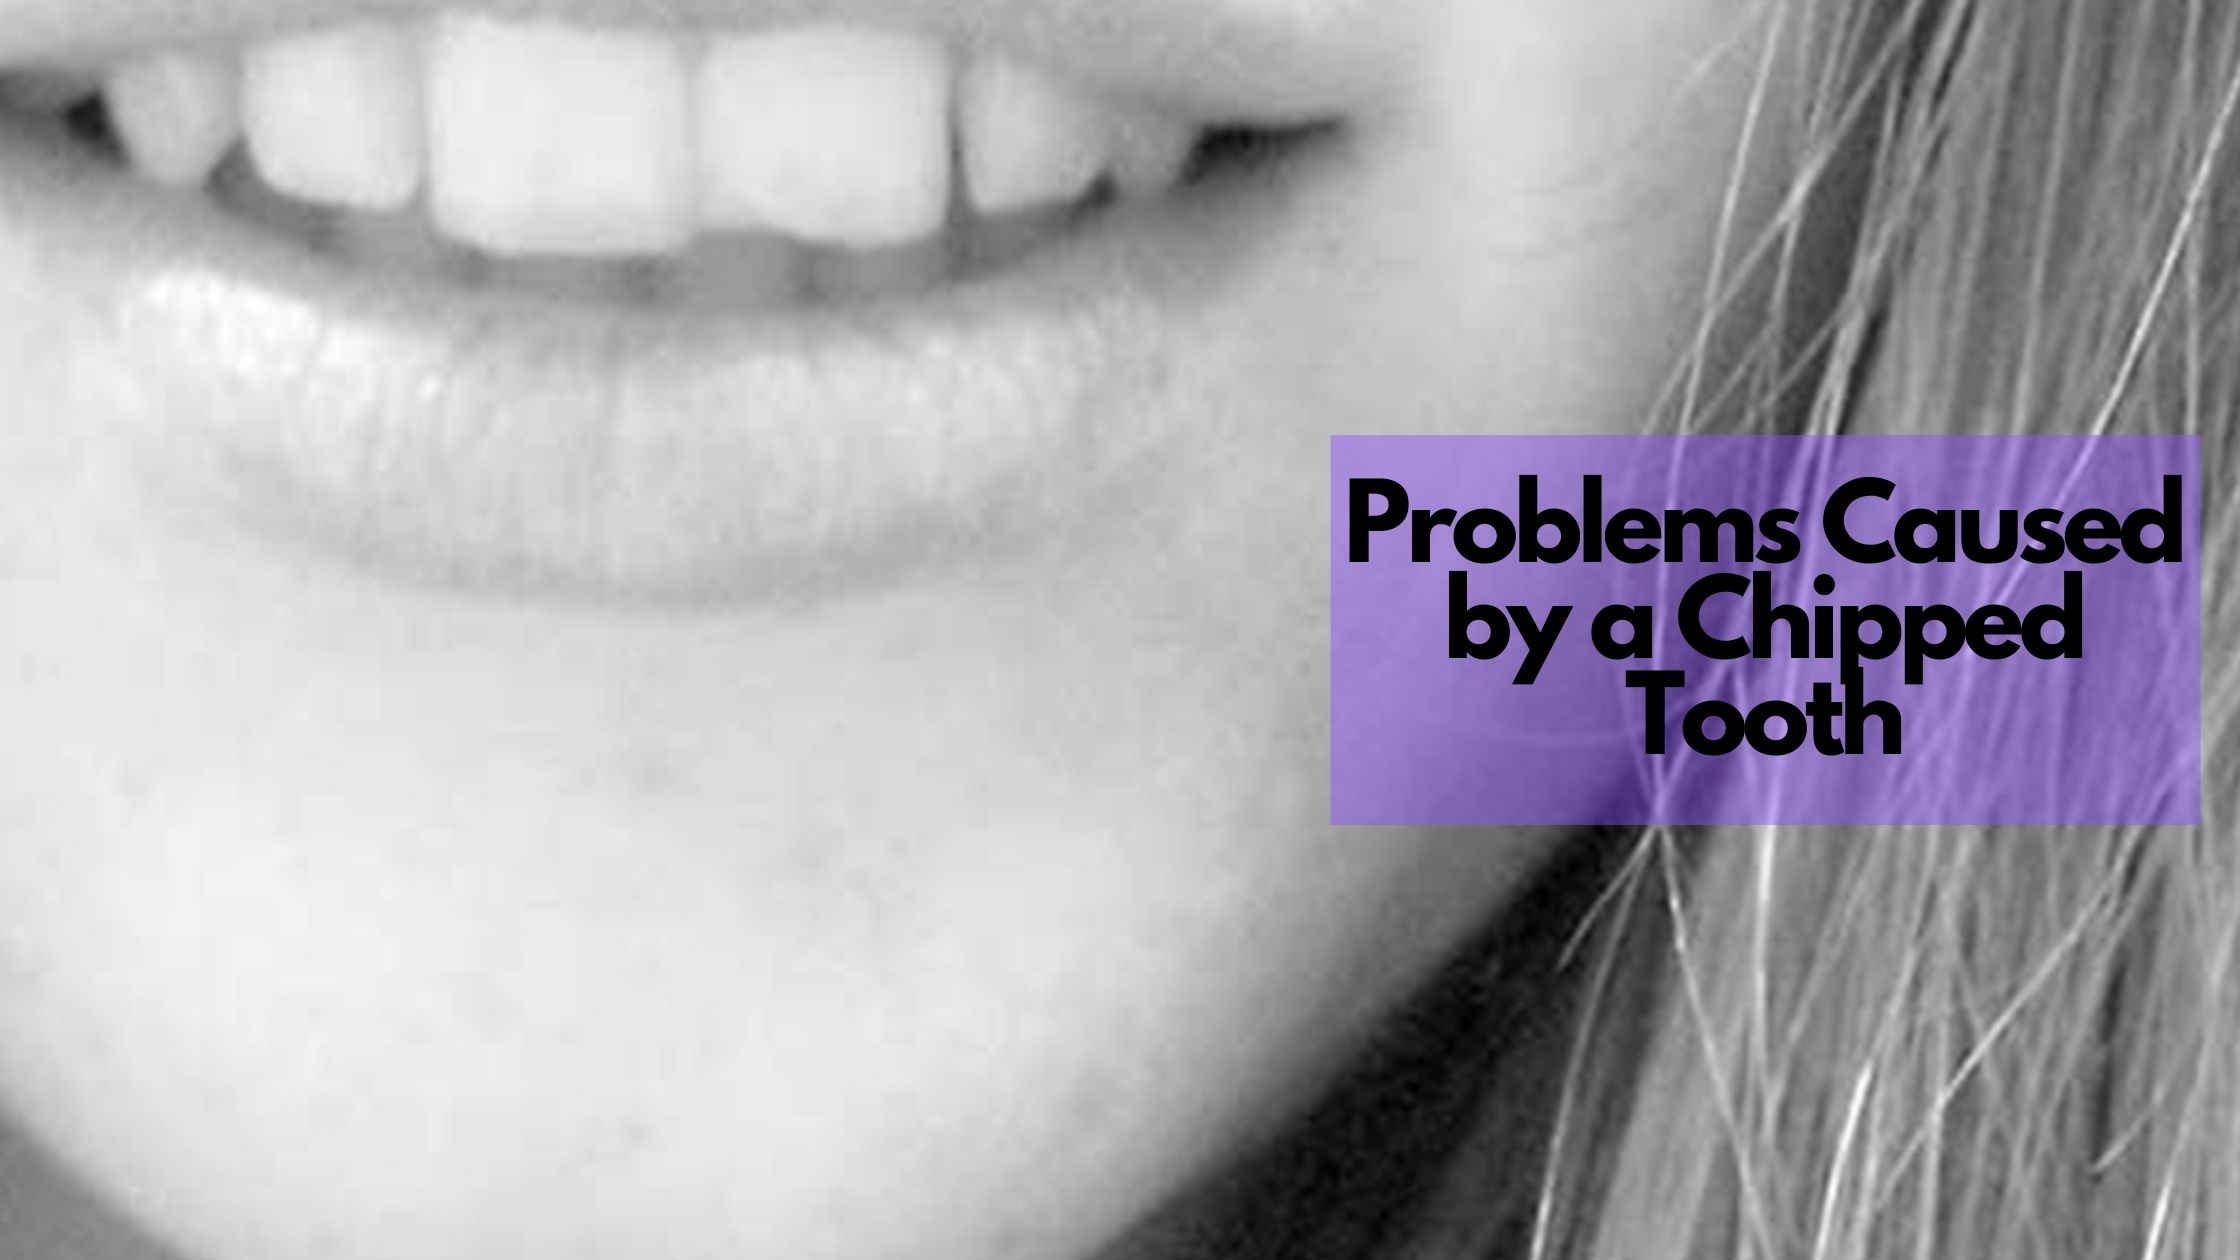 Problems Caused by a Chipped Tooth